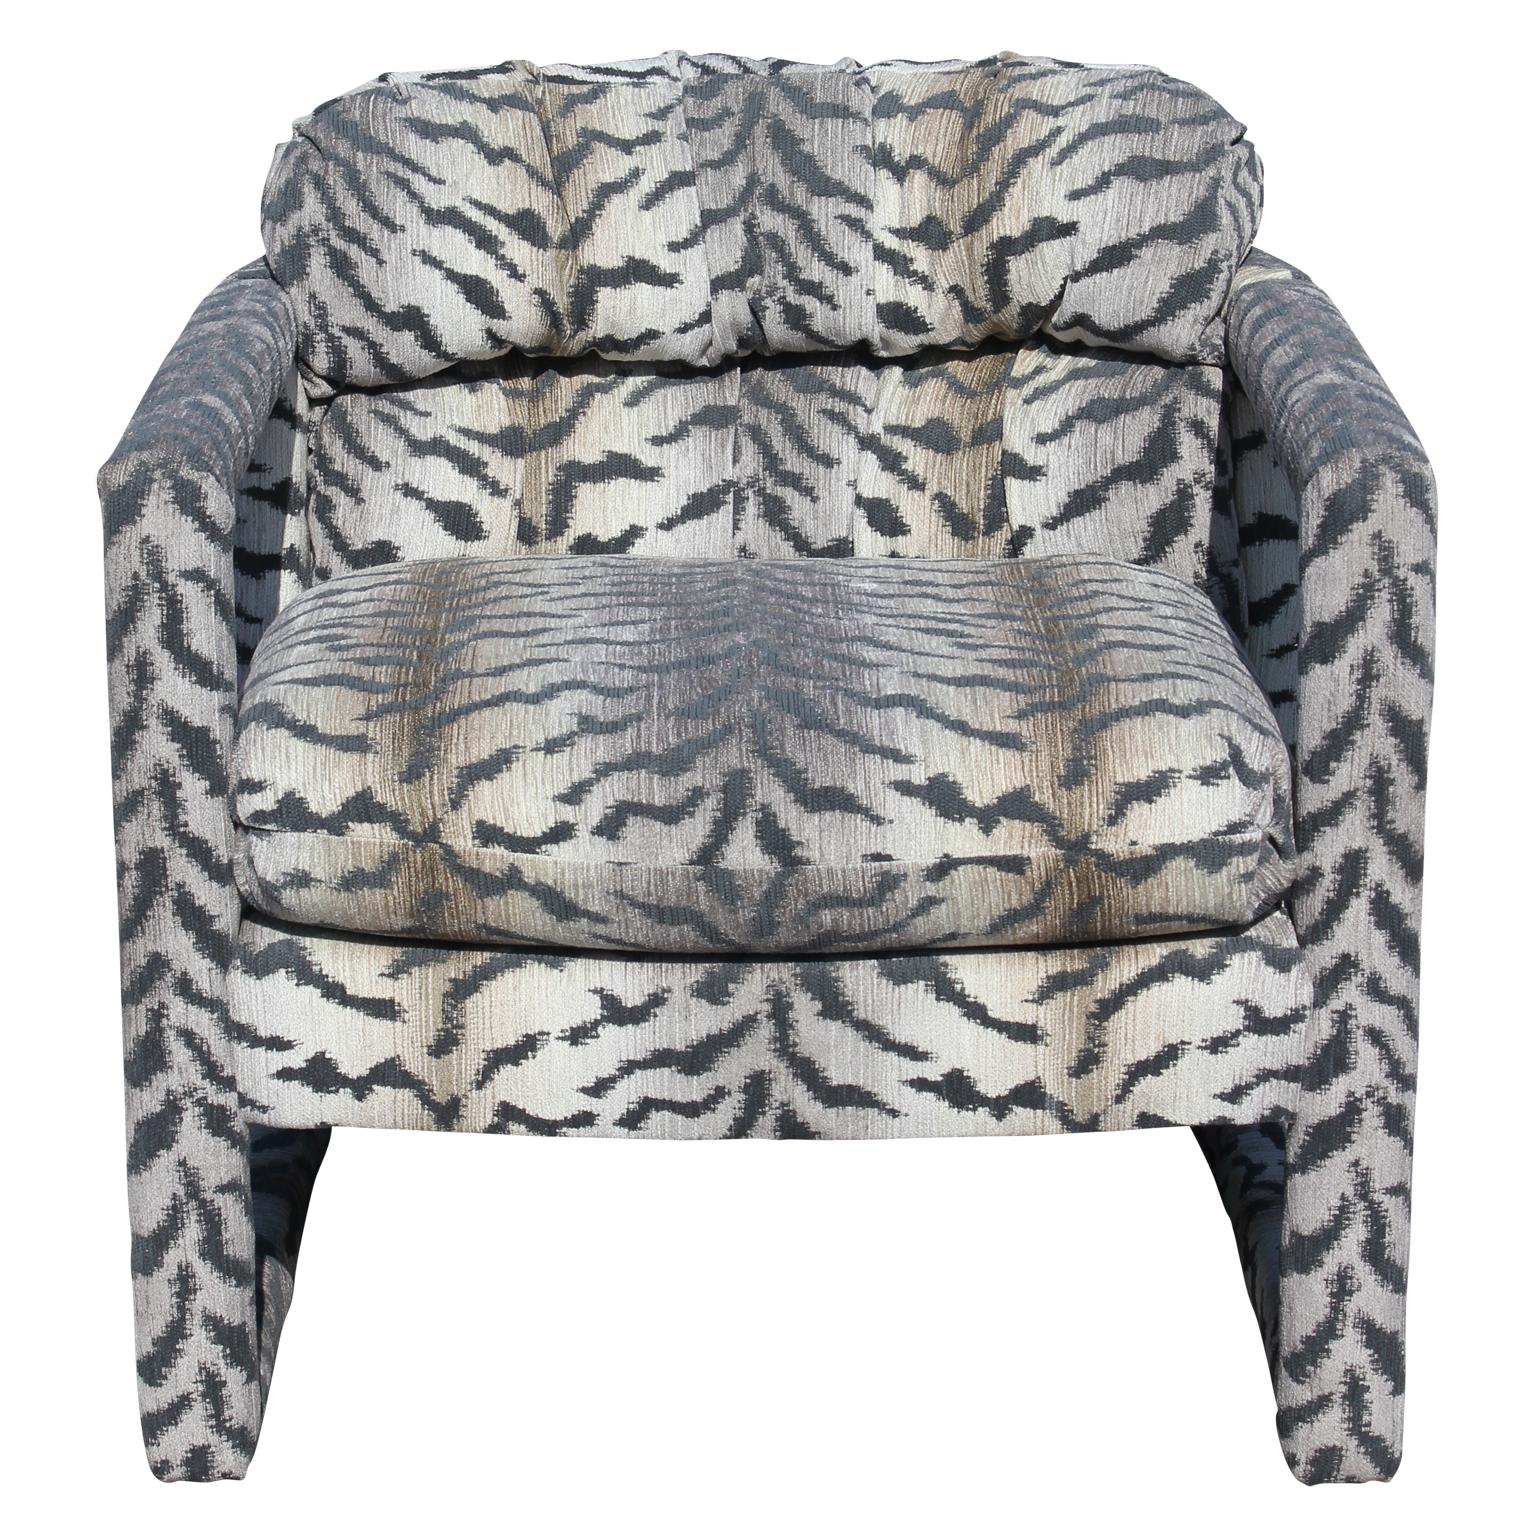 Lovely pair of Parson style barrel back lounge chairs by Drexel, in the style of Milo Baughman. Freshly upholstered in a lovely tiger pattern by Kravet.